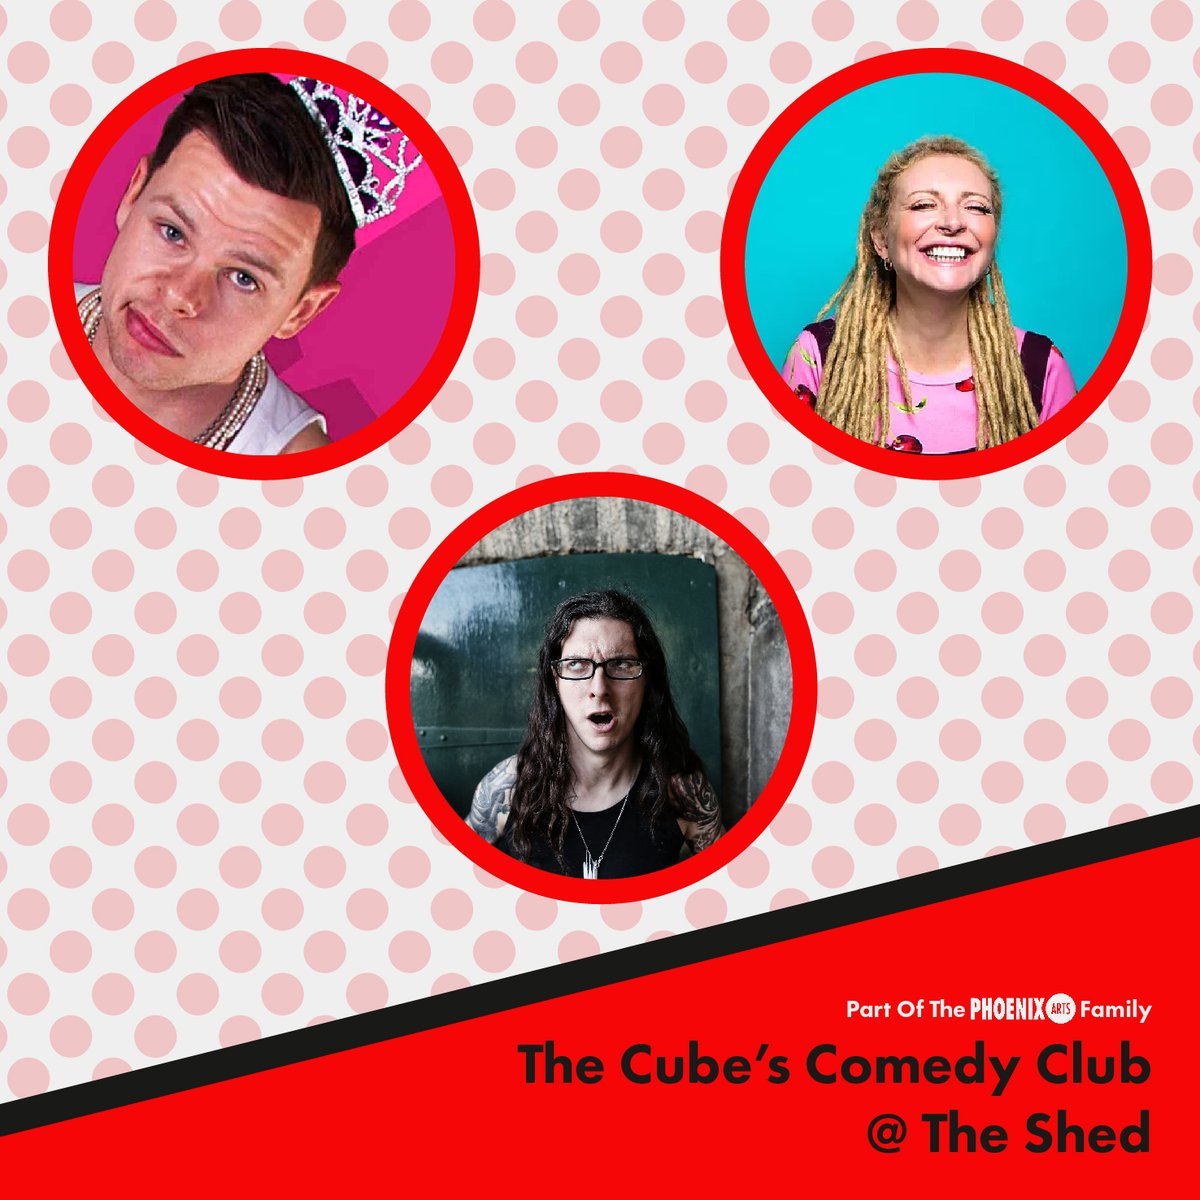 The Cube have a fantastic line-up of comedians ready for tomorrow nights show! 🗓️Thursday 7th of September, 8:00pm 📍The Cube @ The Shed 🎟️Tickets £12.50 Aaron Twitchen, Samantha Day and Andrew O’Neill are ready to blow you away with their quick wit. bit.ly/TCCCTSS23